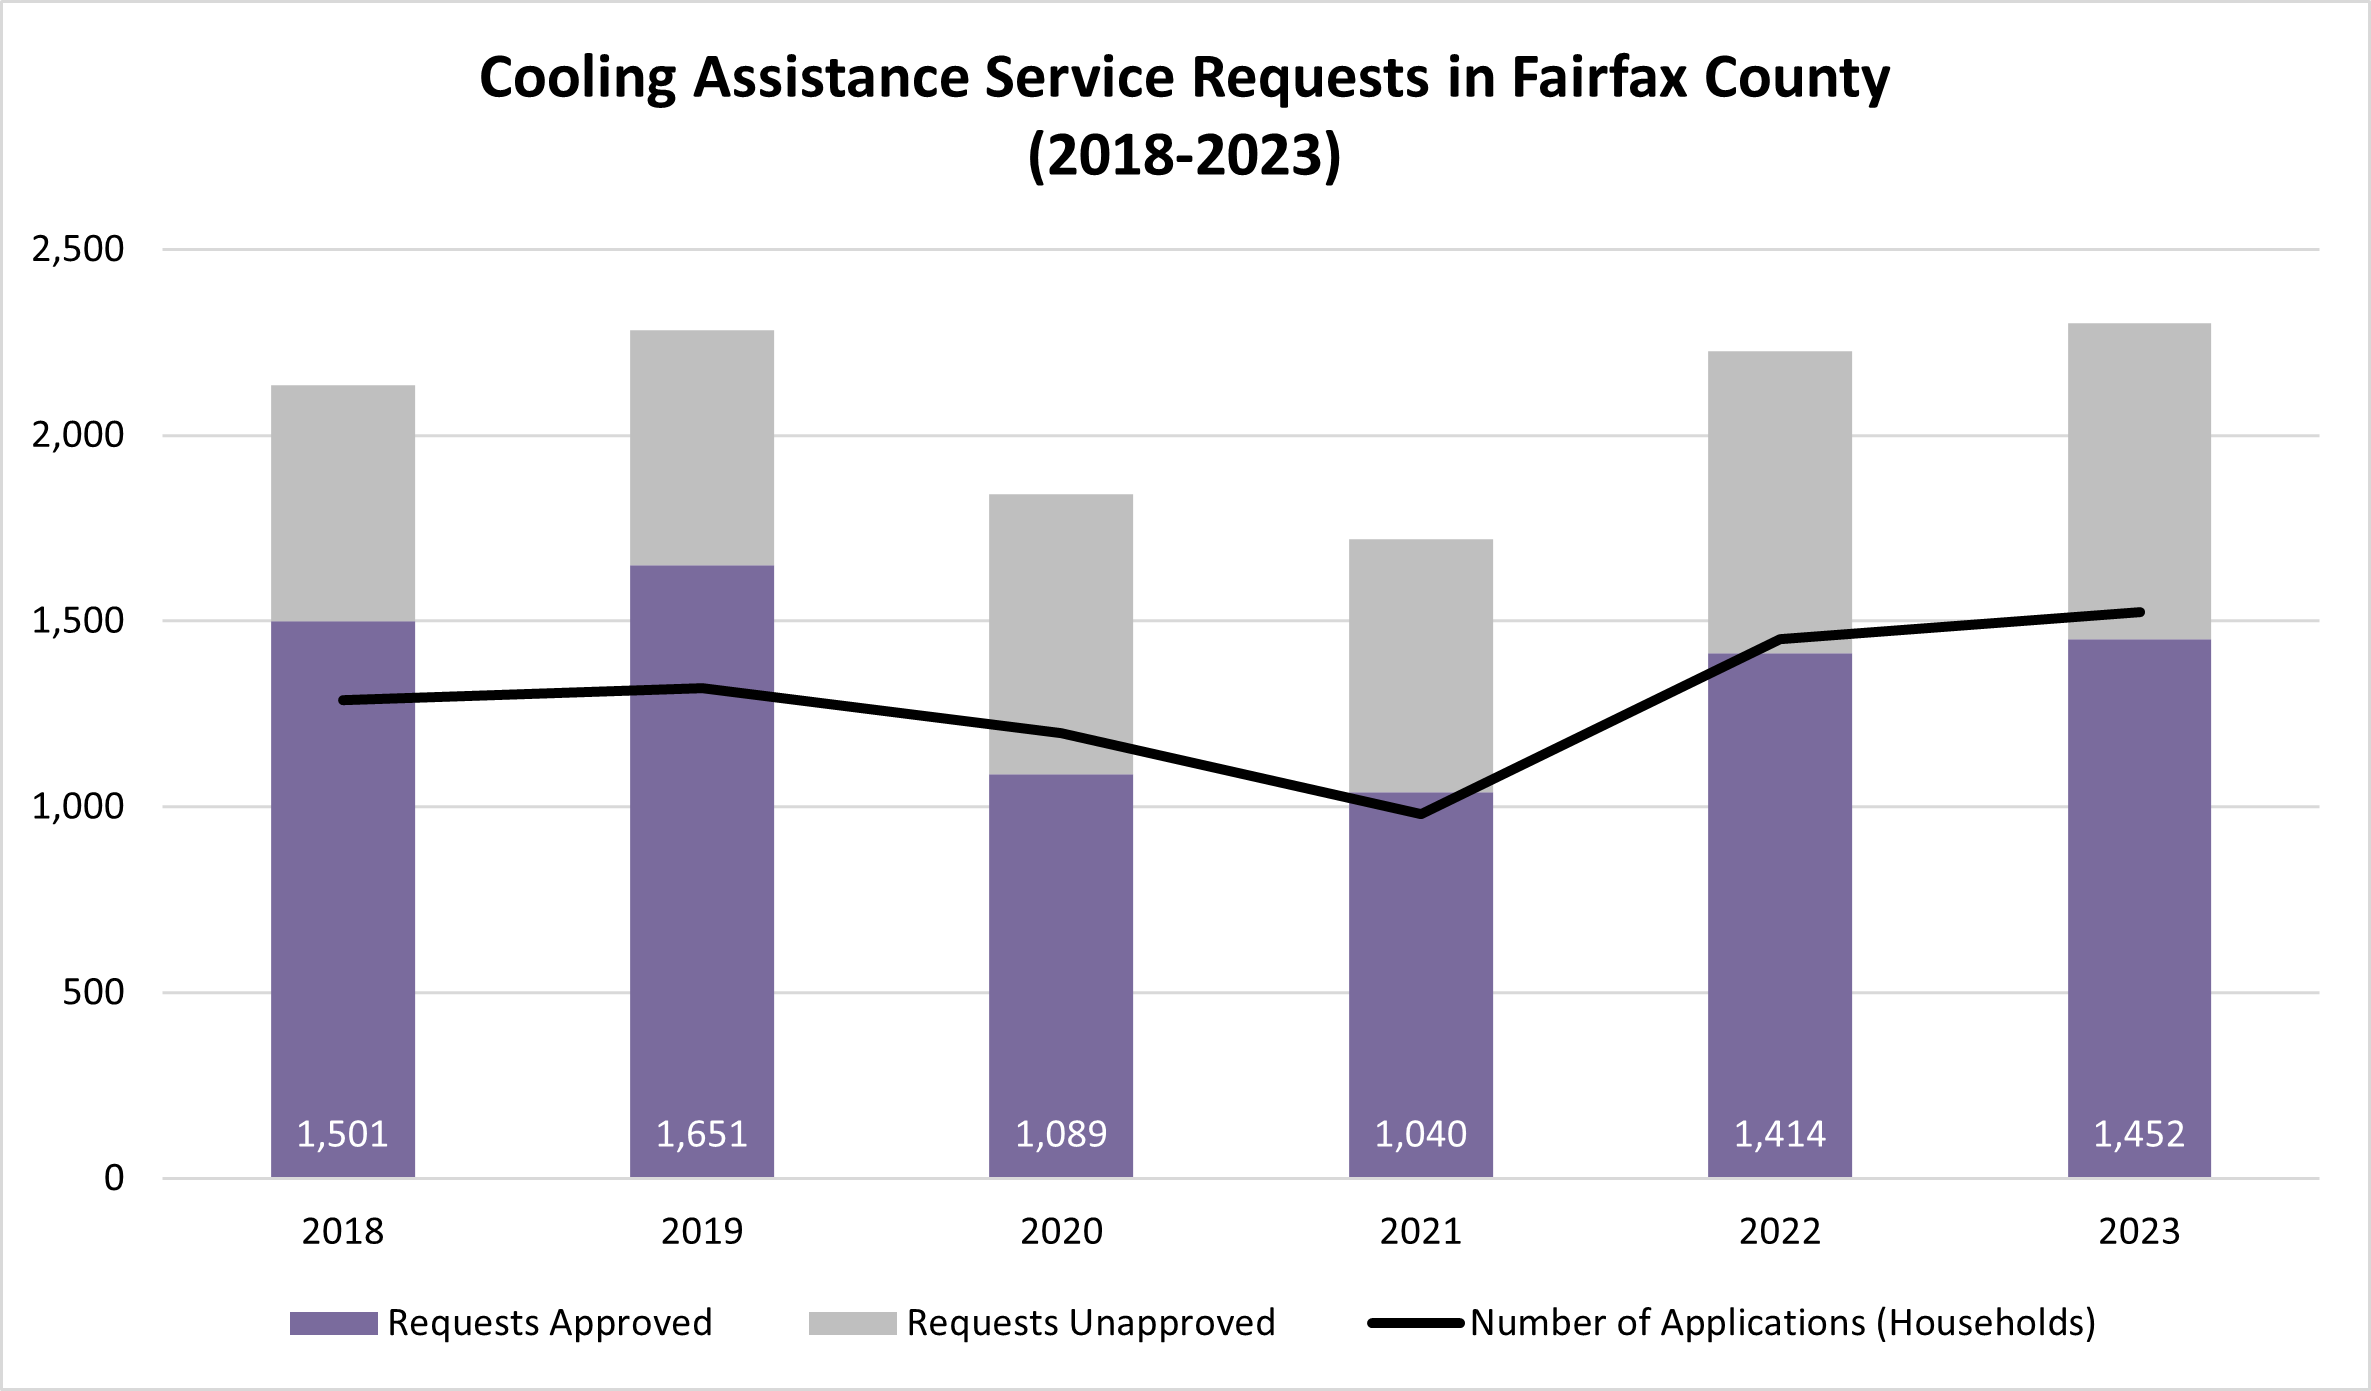 cooling assistance service requests in Fairfax County from 2018 to 2023